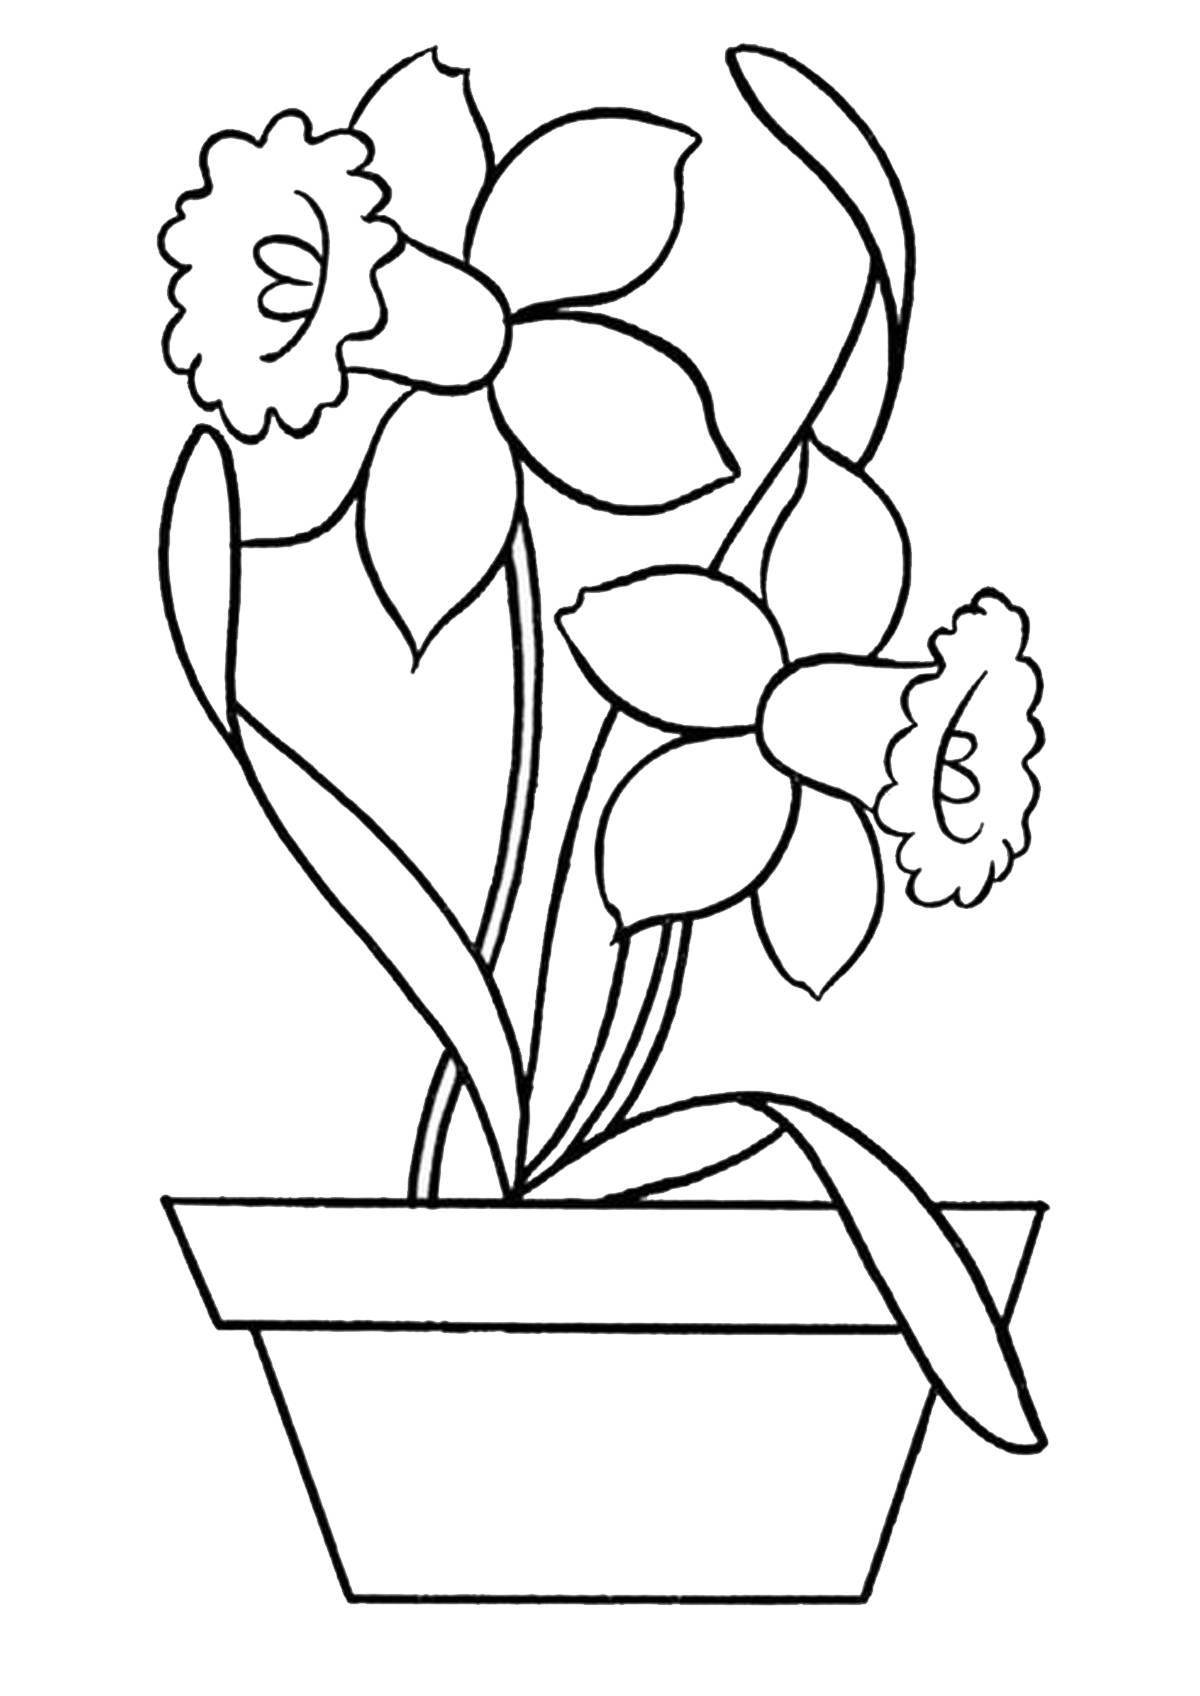 Fun coloring flower in a pot